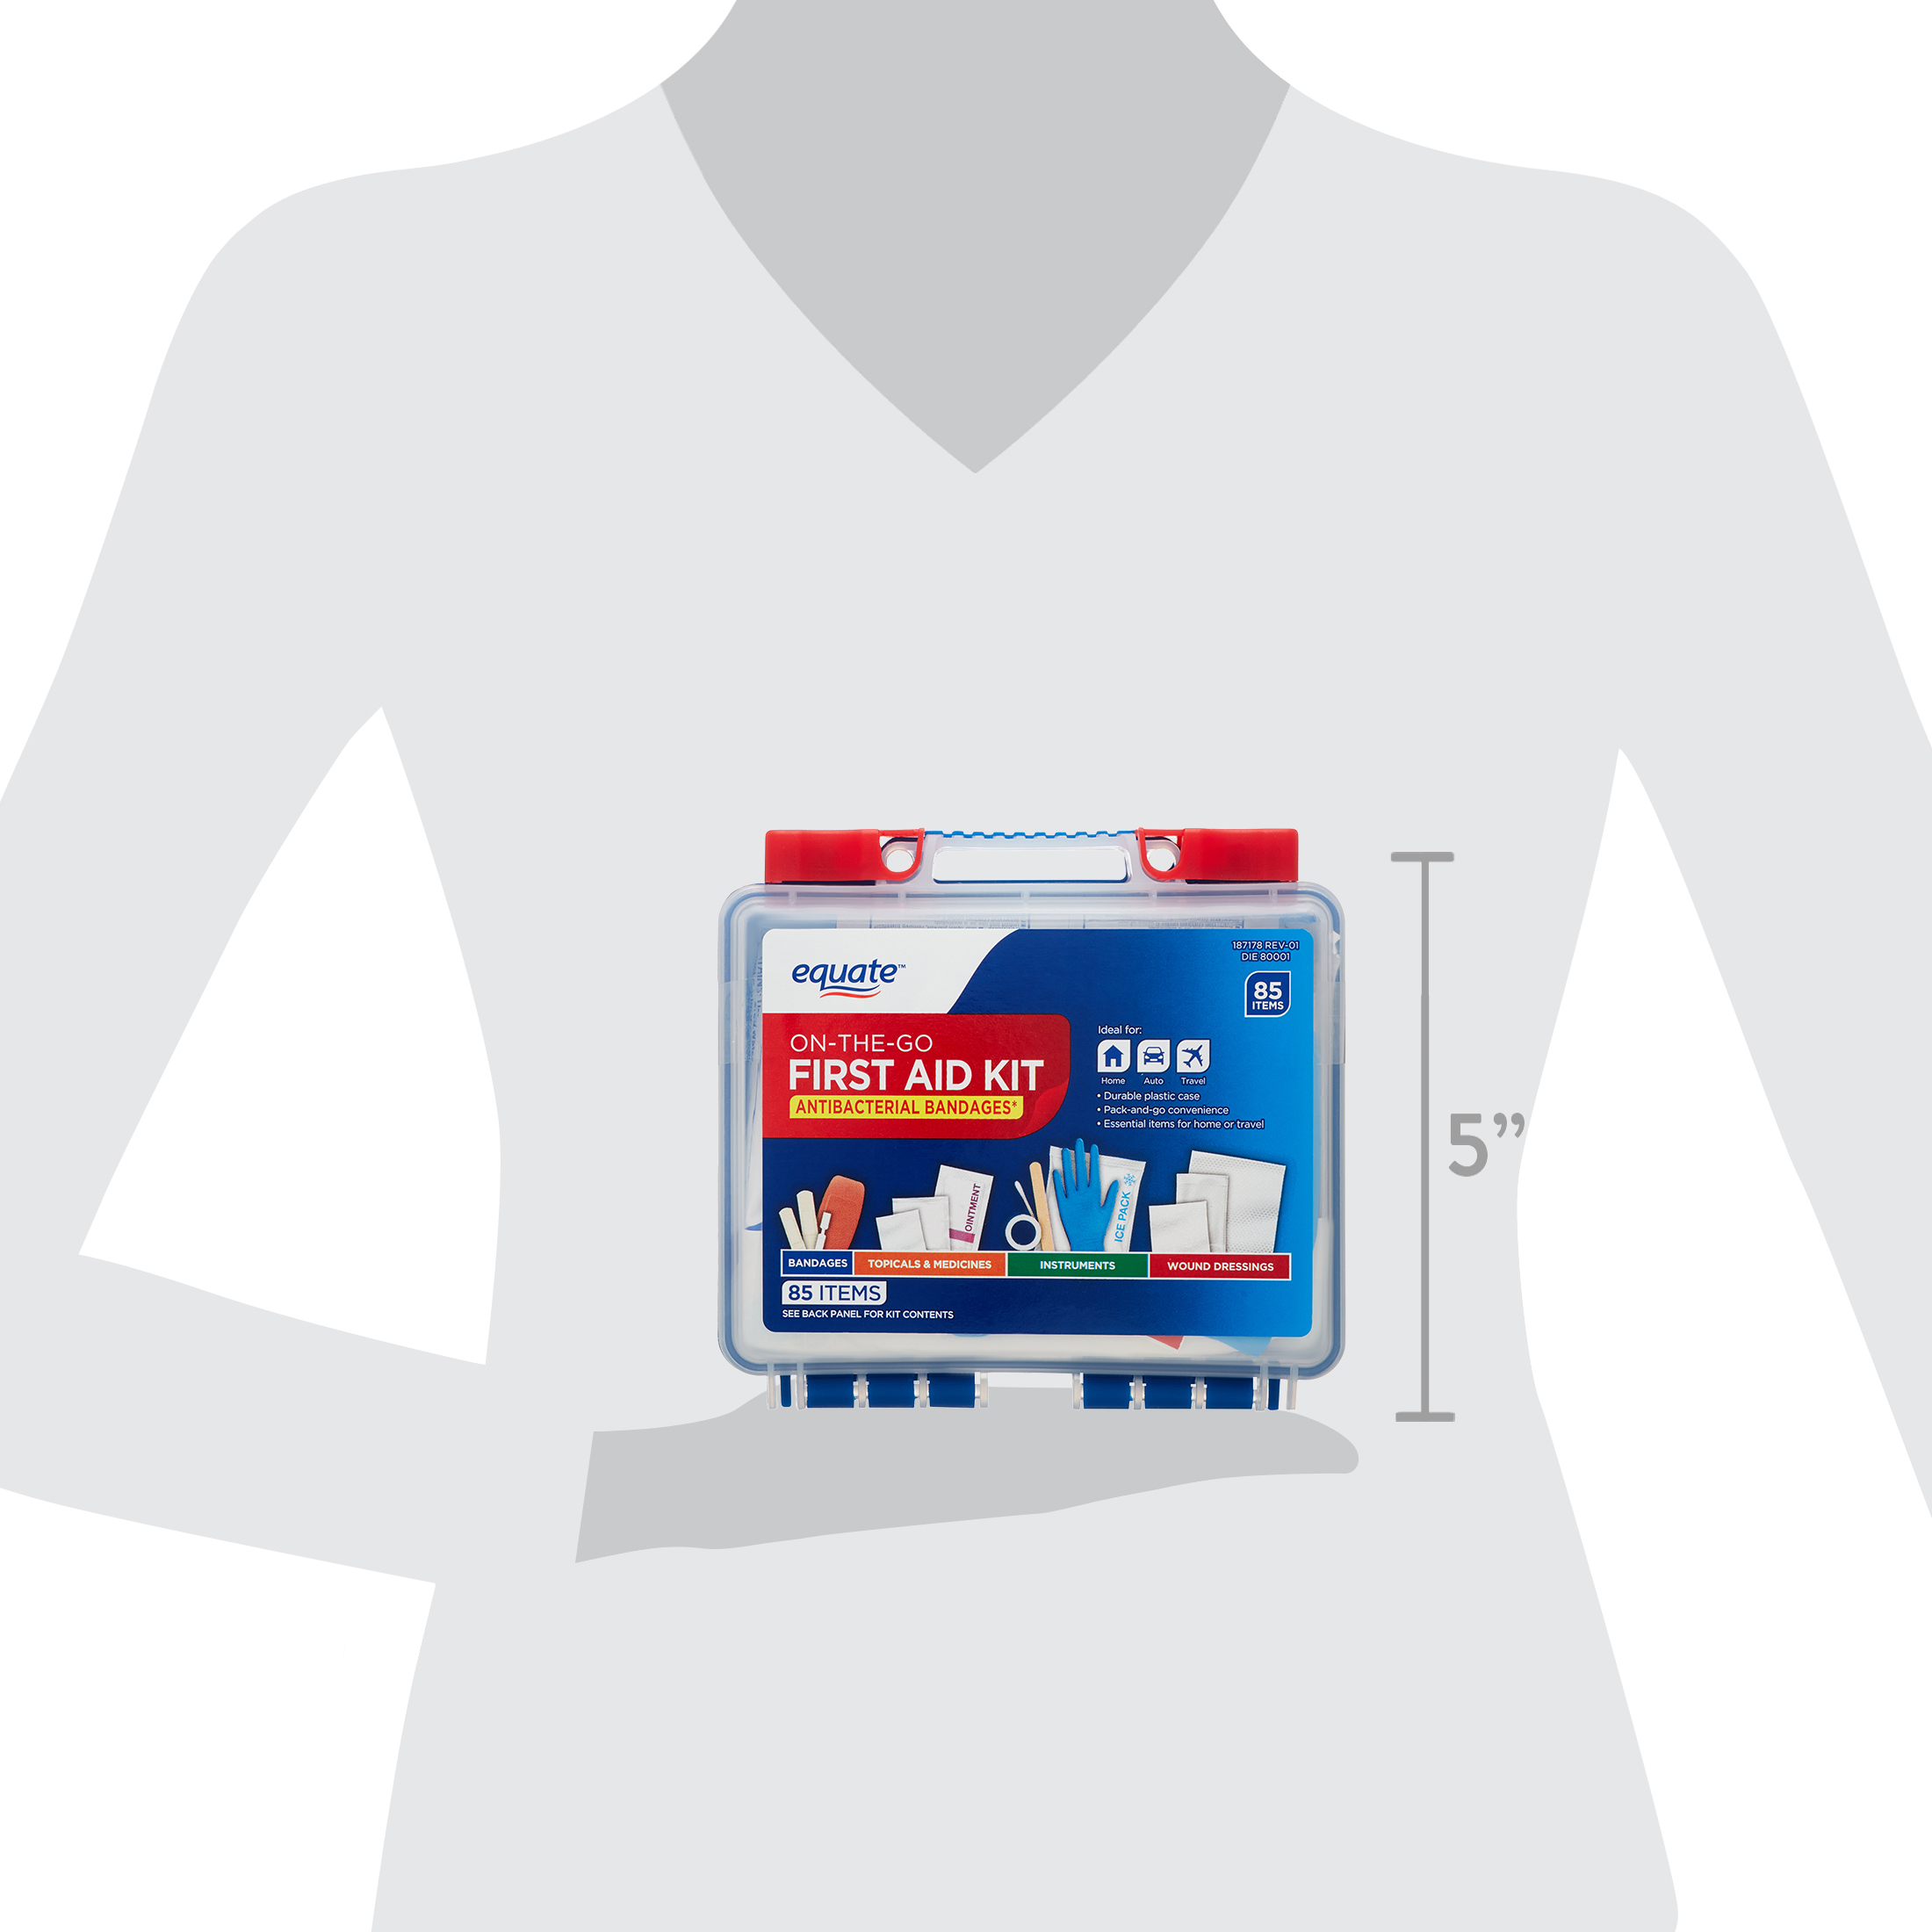 Equate On-The-Go First Aid Kit, 85 Items - image 9 of 9